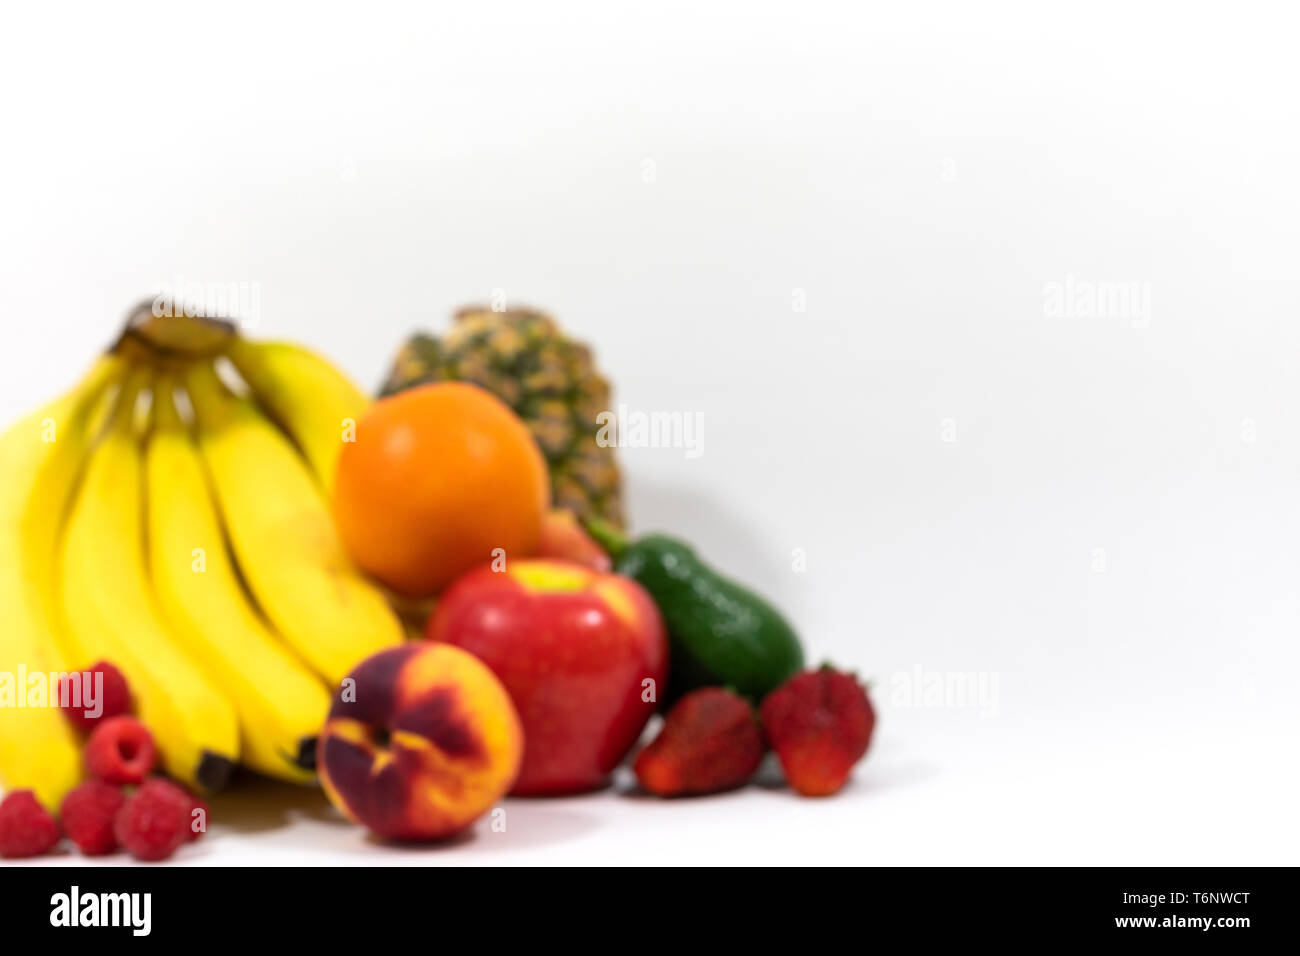 Out of focus fresh organic fruit concept, weight loss obesity, health and wellbeing. Clean eating, plant based, whole foods, vegan lifestyles Stock Photo